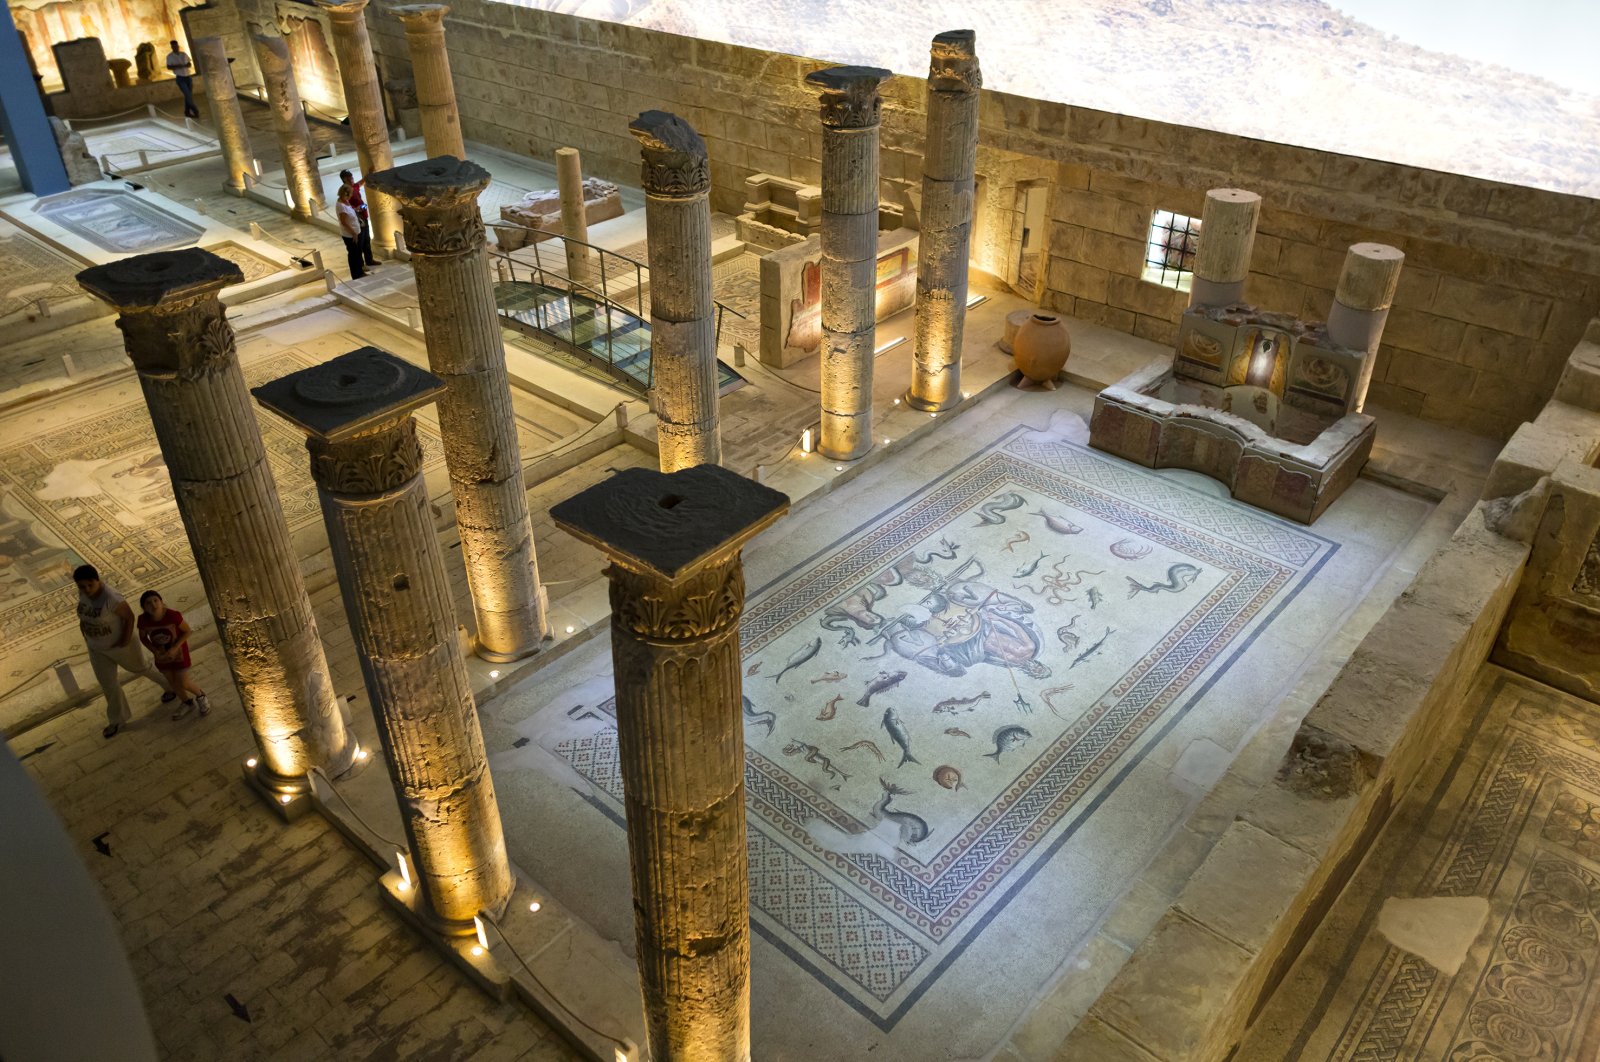 Zeugma Museum is an ideal option for families who want to take a cultural and artistic trip with their children. (Shutterstock Photo)